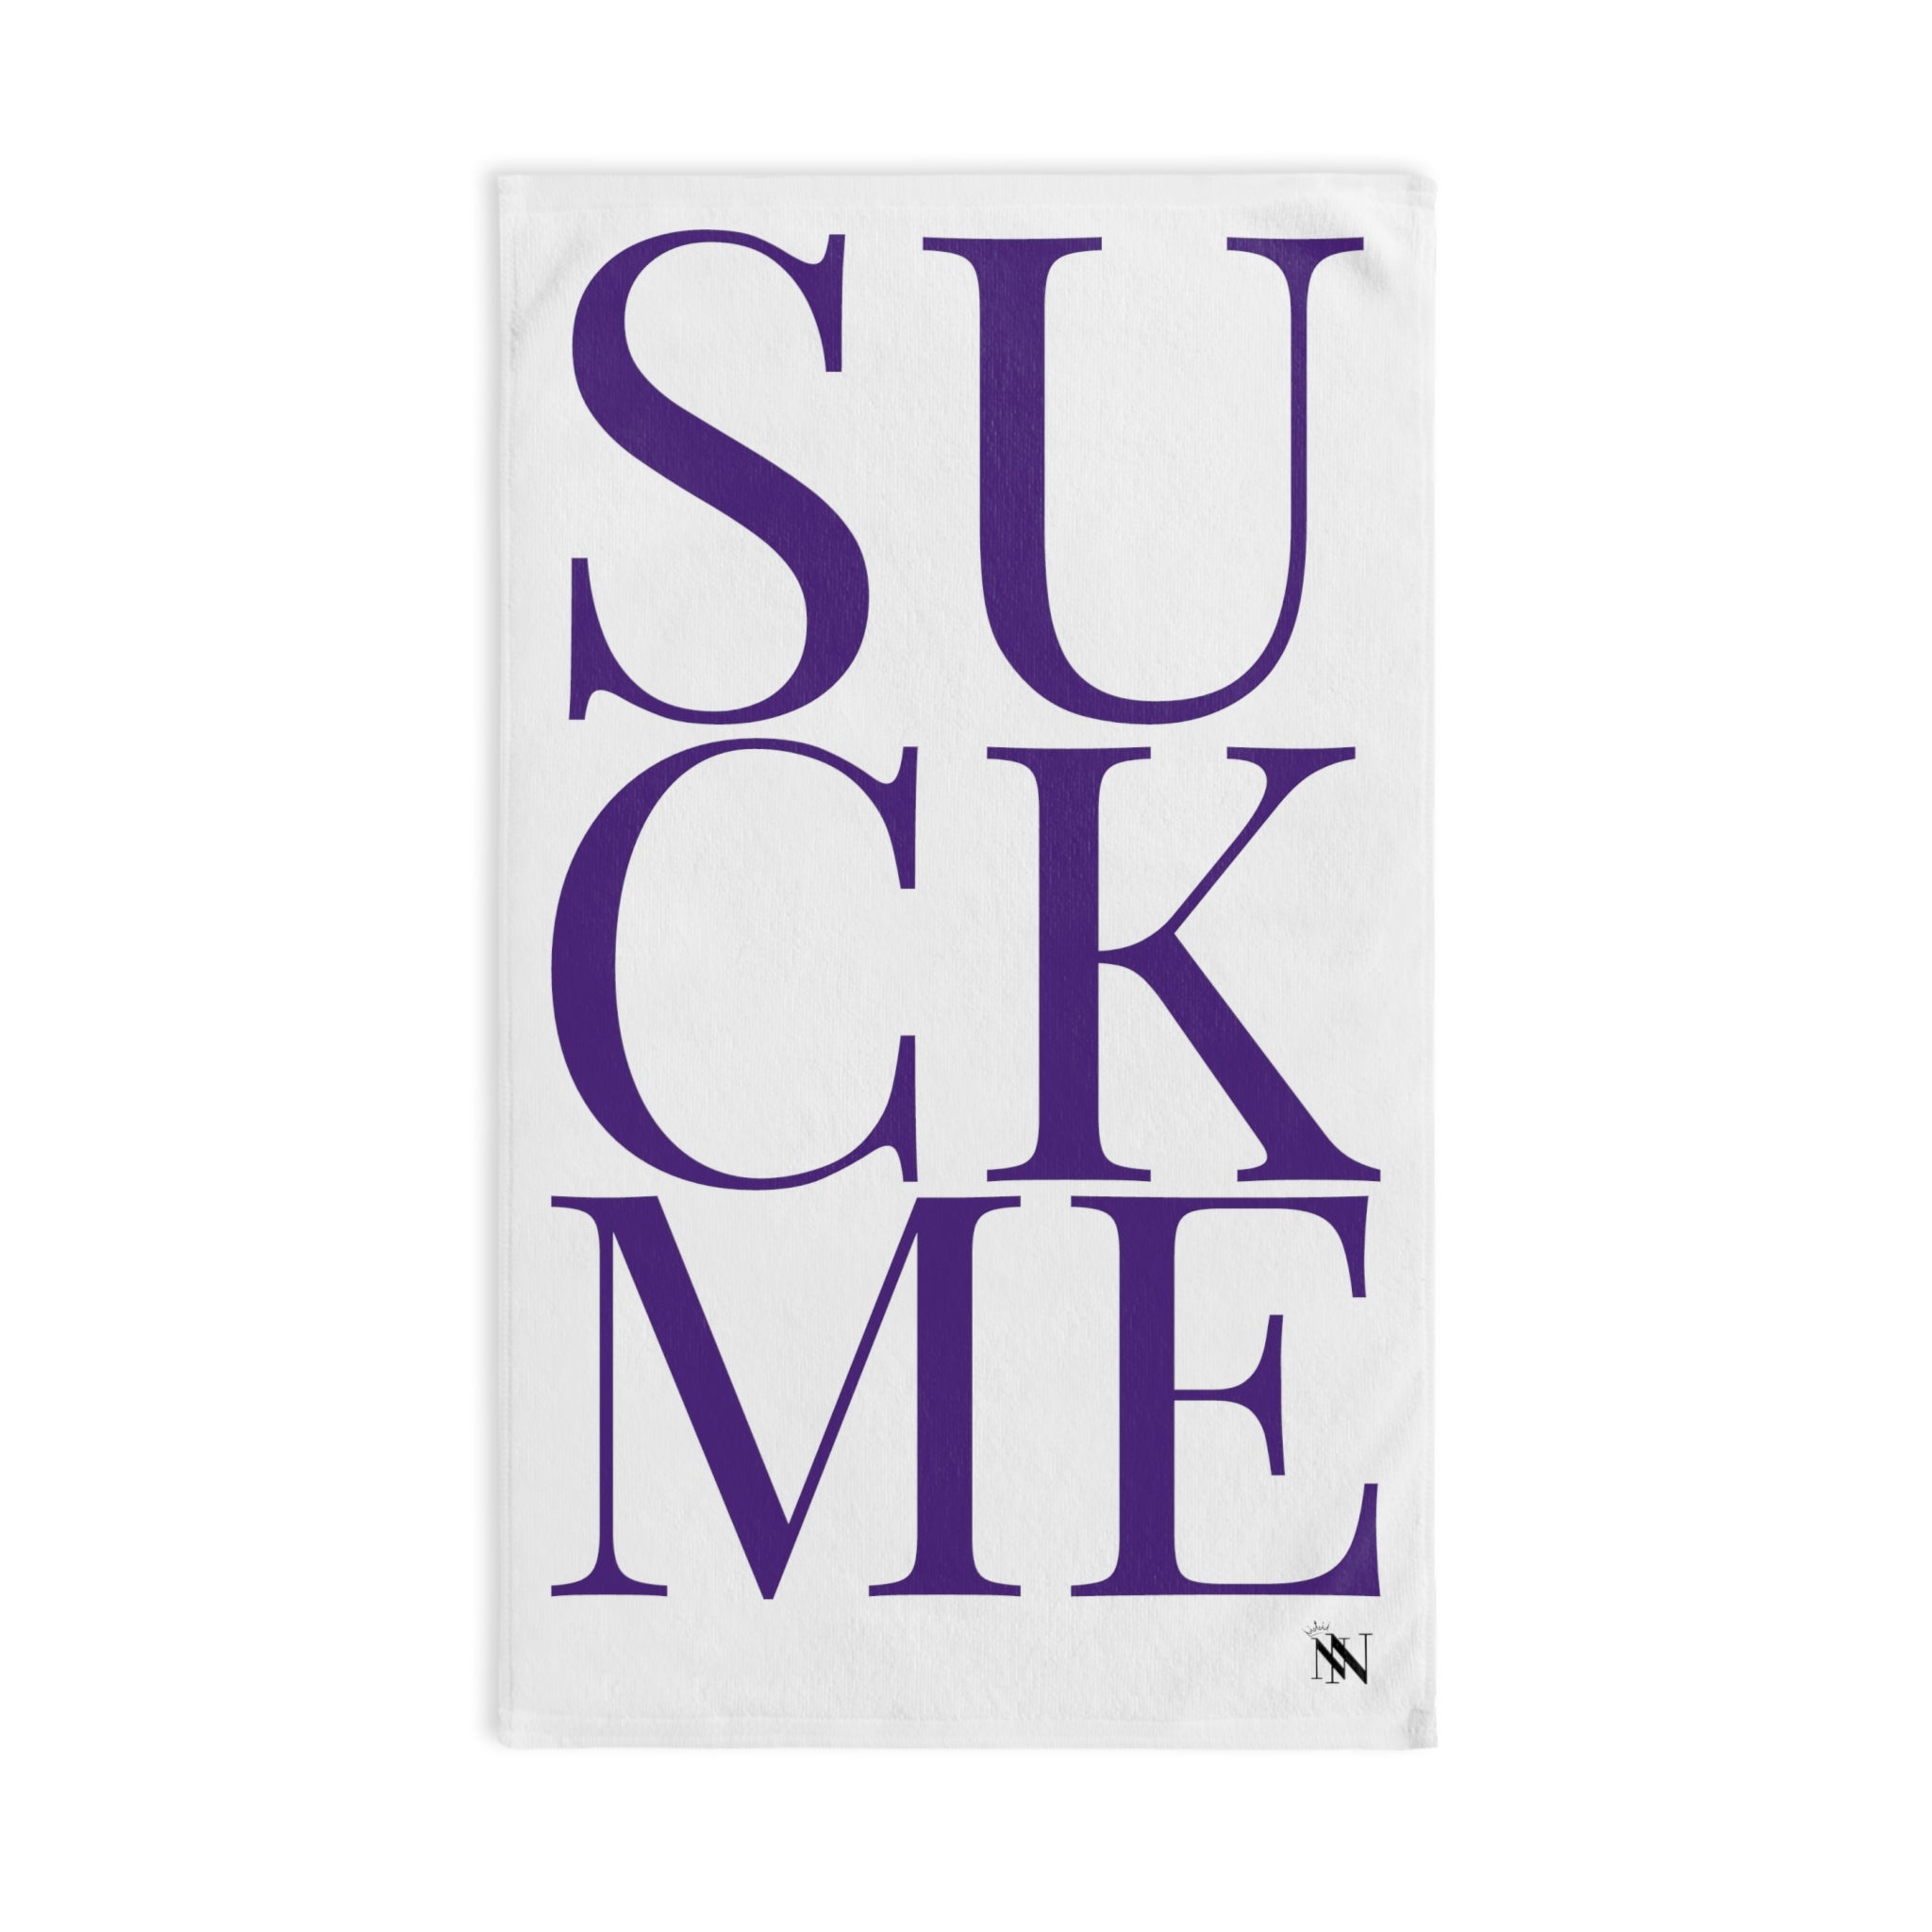 Suck Me Purple White | Funny Gifts for Men - Gifts for Him - Birthday Gifts for Men, Him, Her, Husband, Boyfriend, Girlfriend, New Couple Gifts, Fathers & Valentines Day Gifts, Christmas Gifts NECTAR NAPKINS